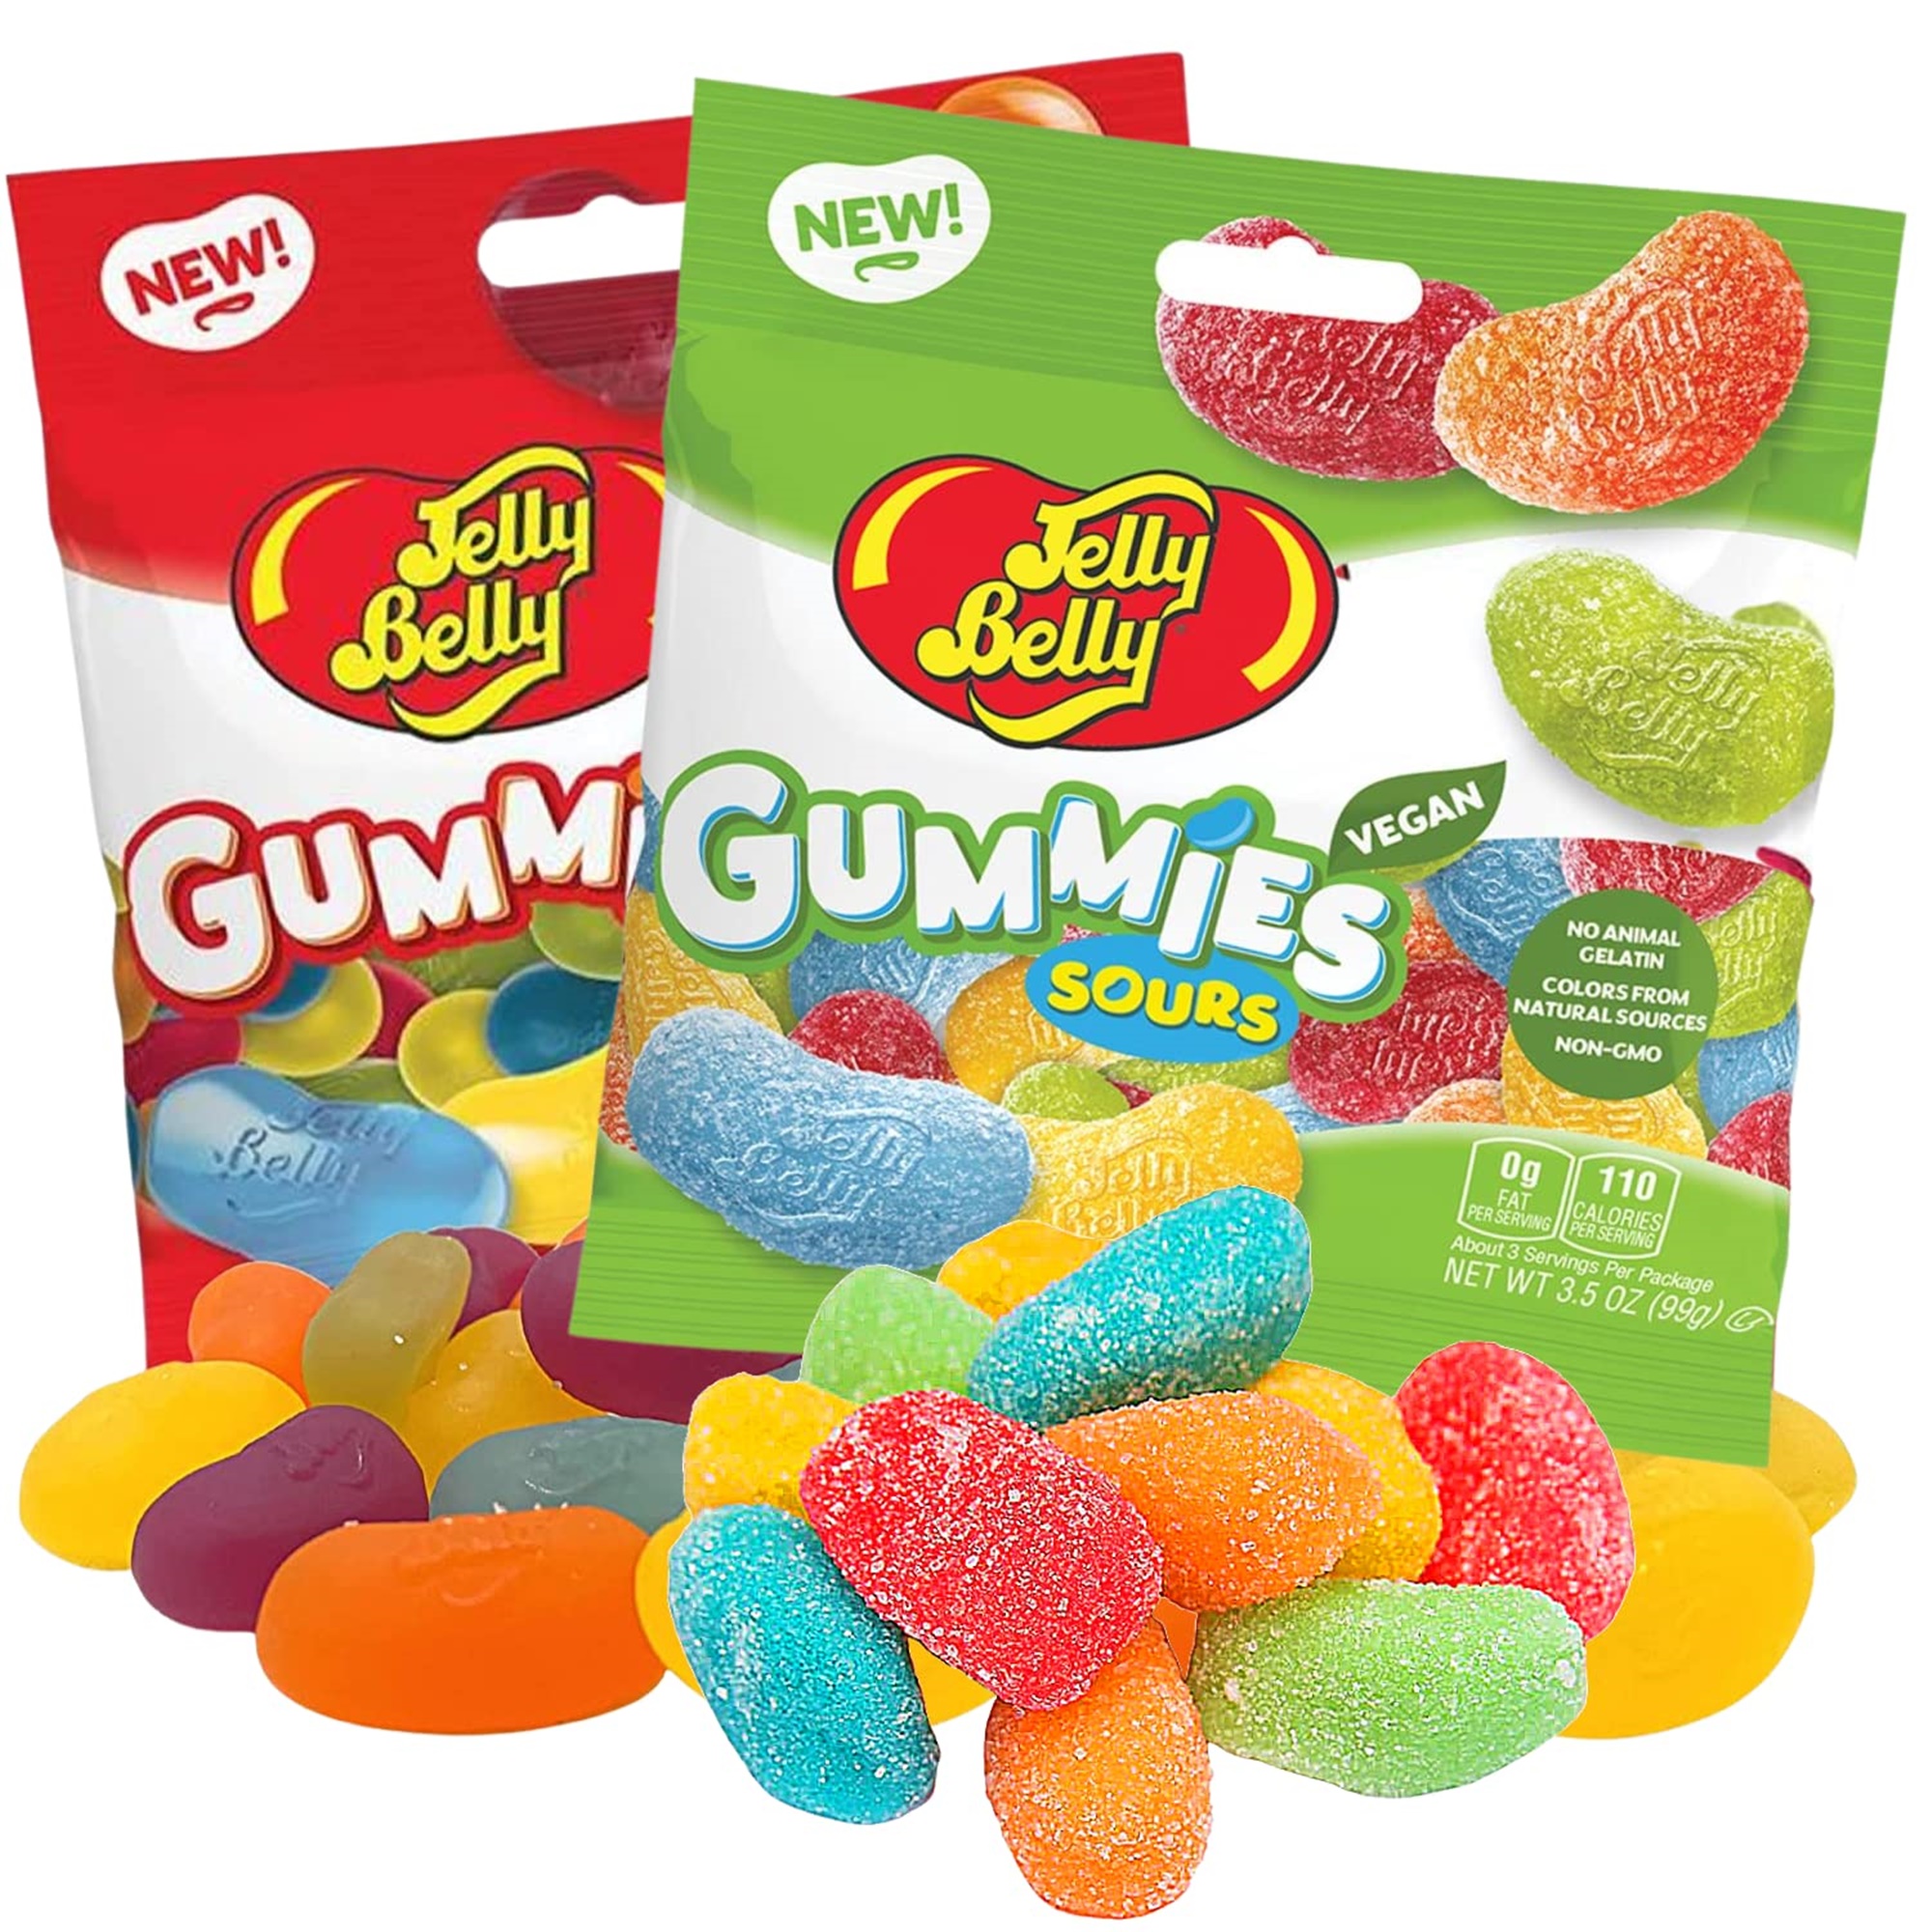 Sweet and Super Sour Vegan Gummy Candies, Fruit Flavored Jumbo Jelly Bean Shaped Gummies, Kosher Non-GMO Bagged Chewy Candy, Pack of 2, 3.5 Ounces Each - image 1 of 7